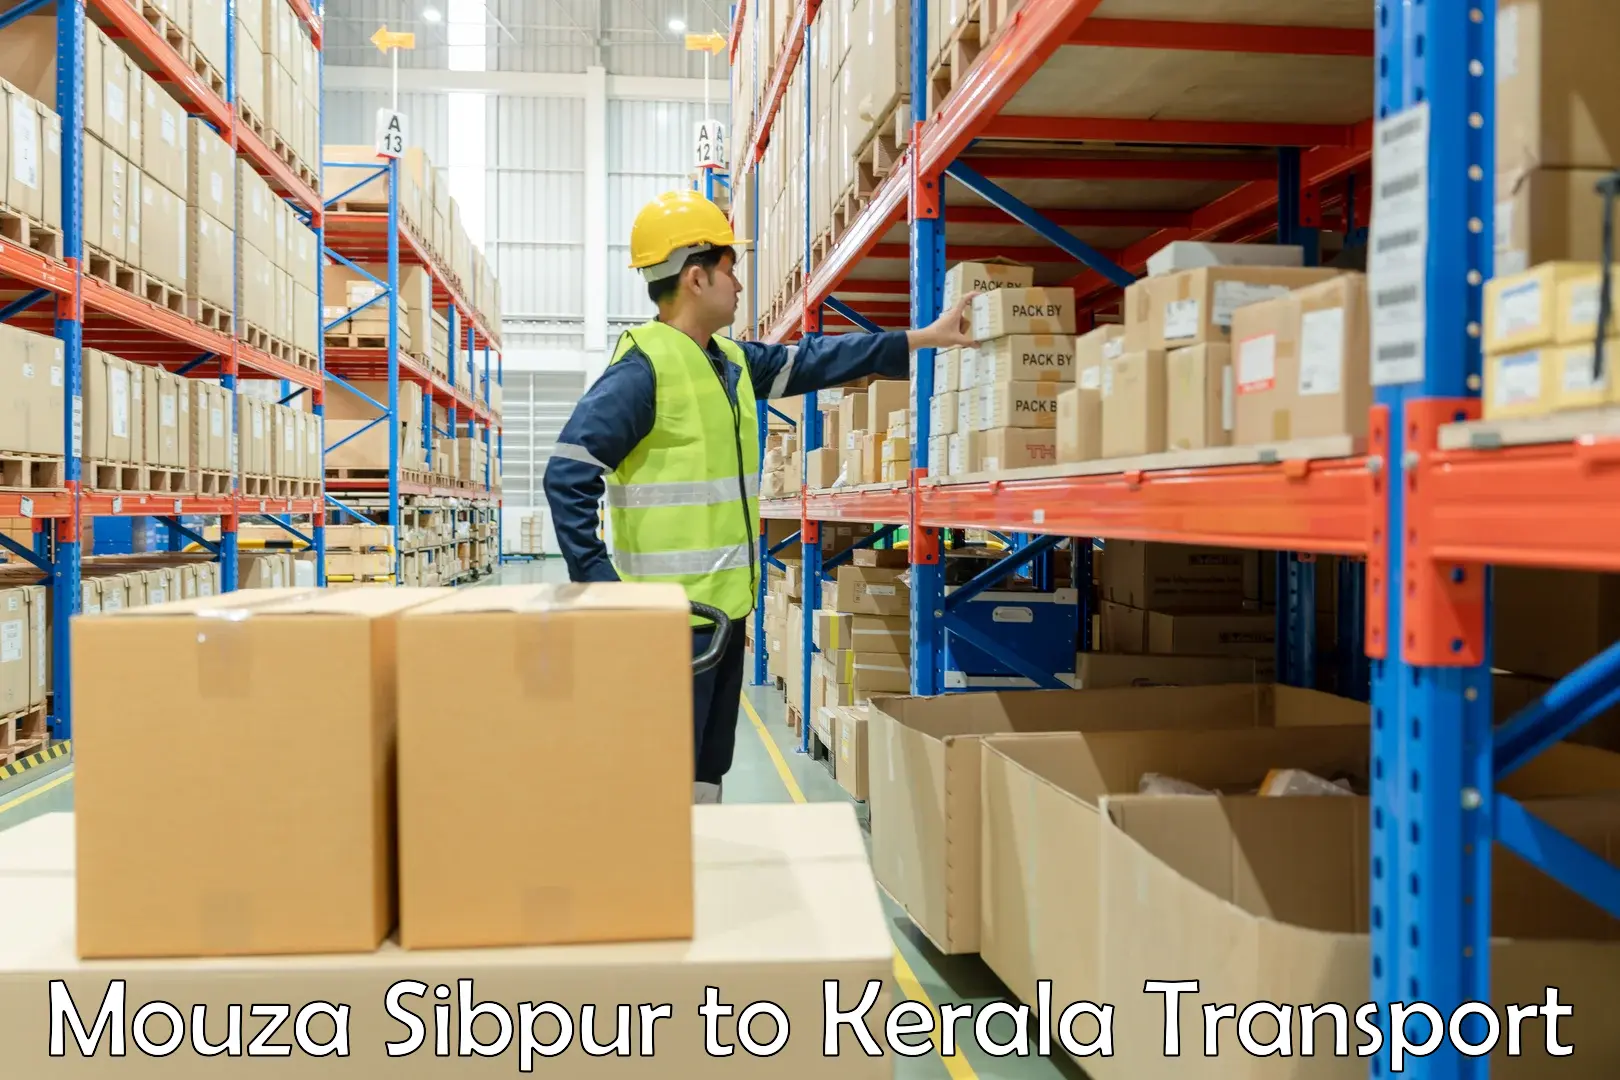 Lorry transport service Mouza Sibpur to Parappa